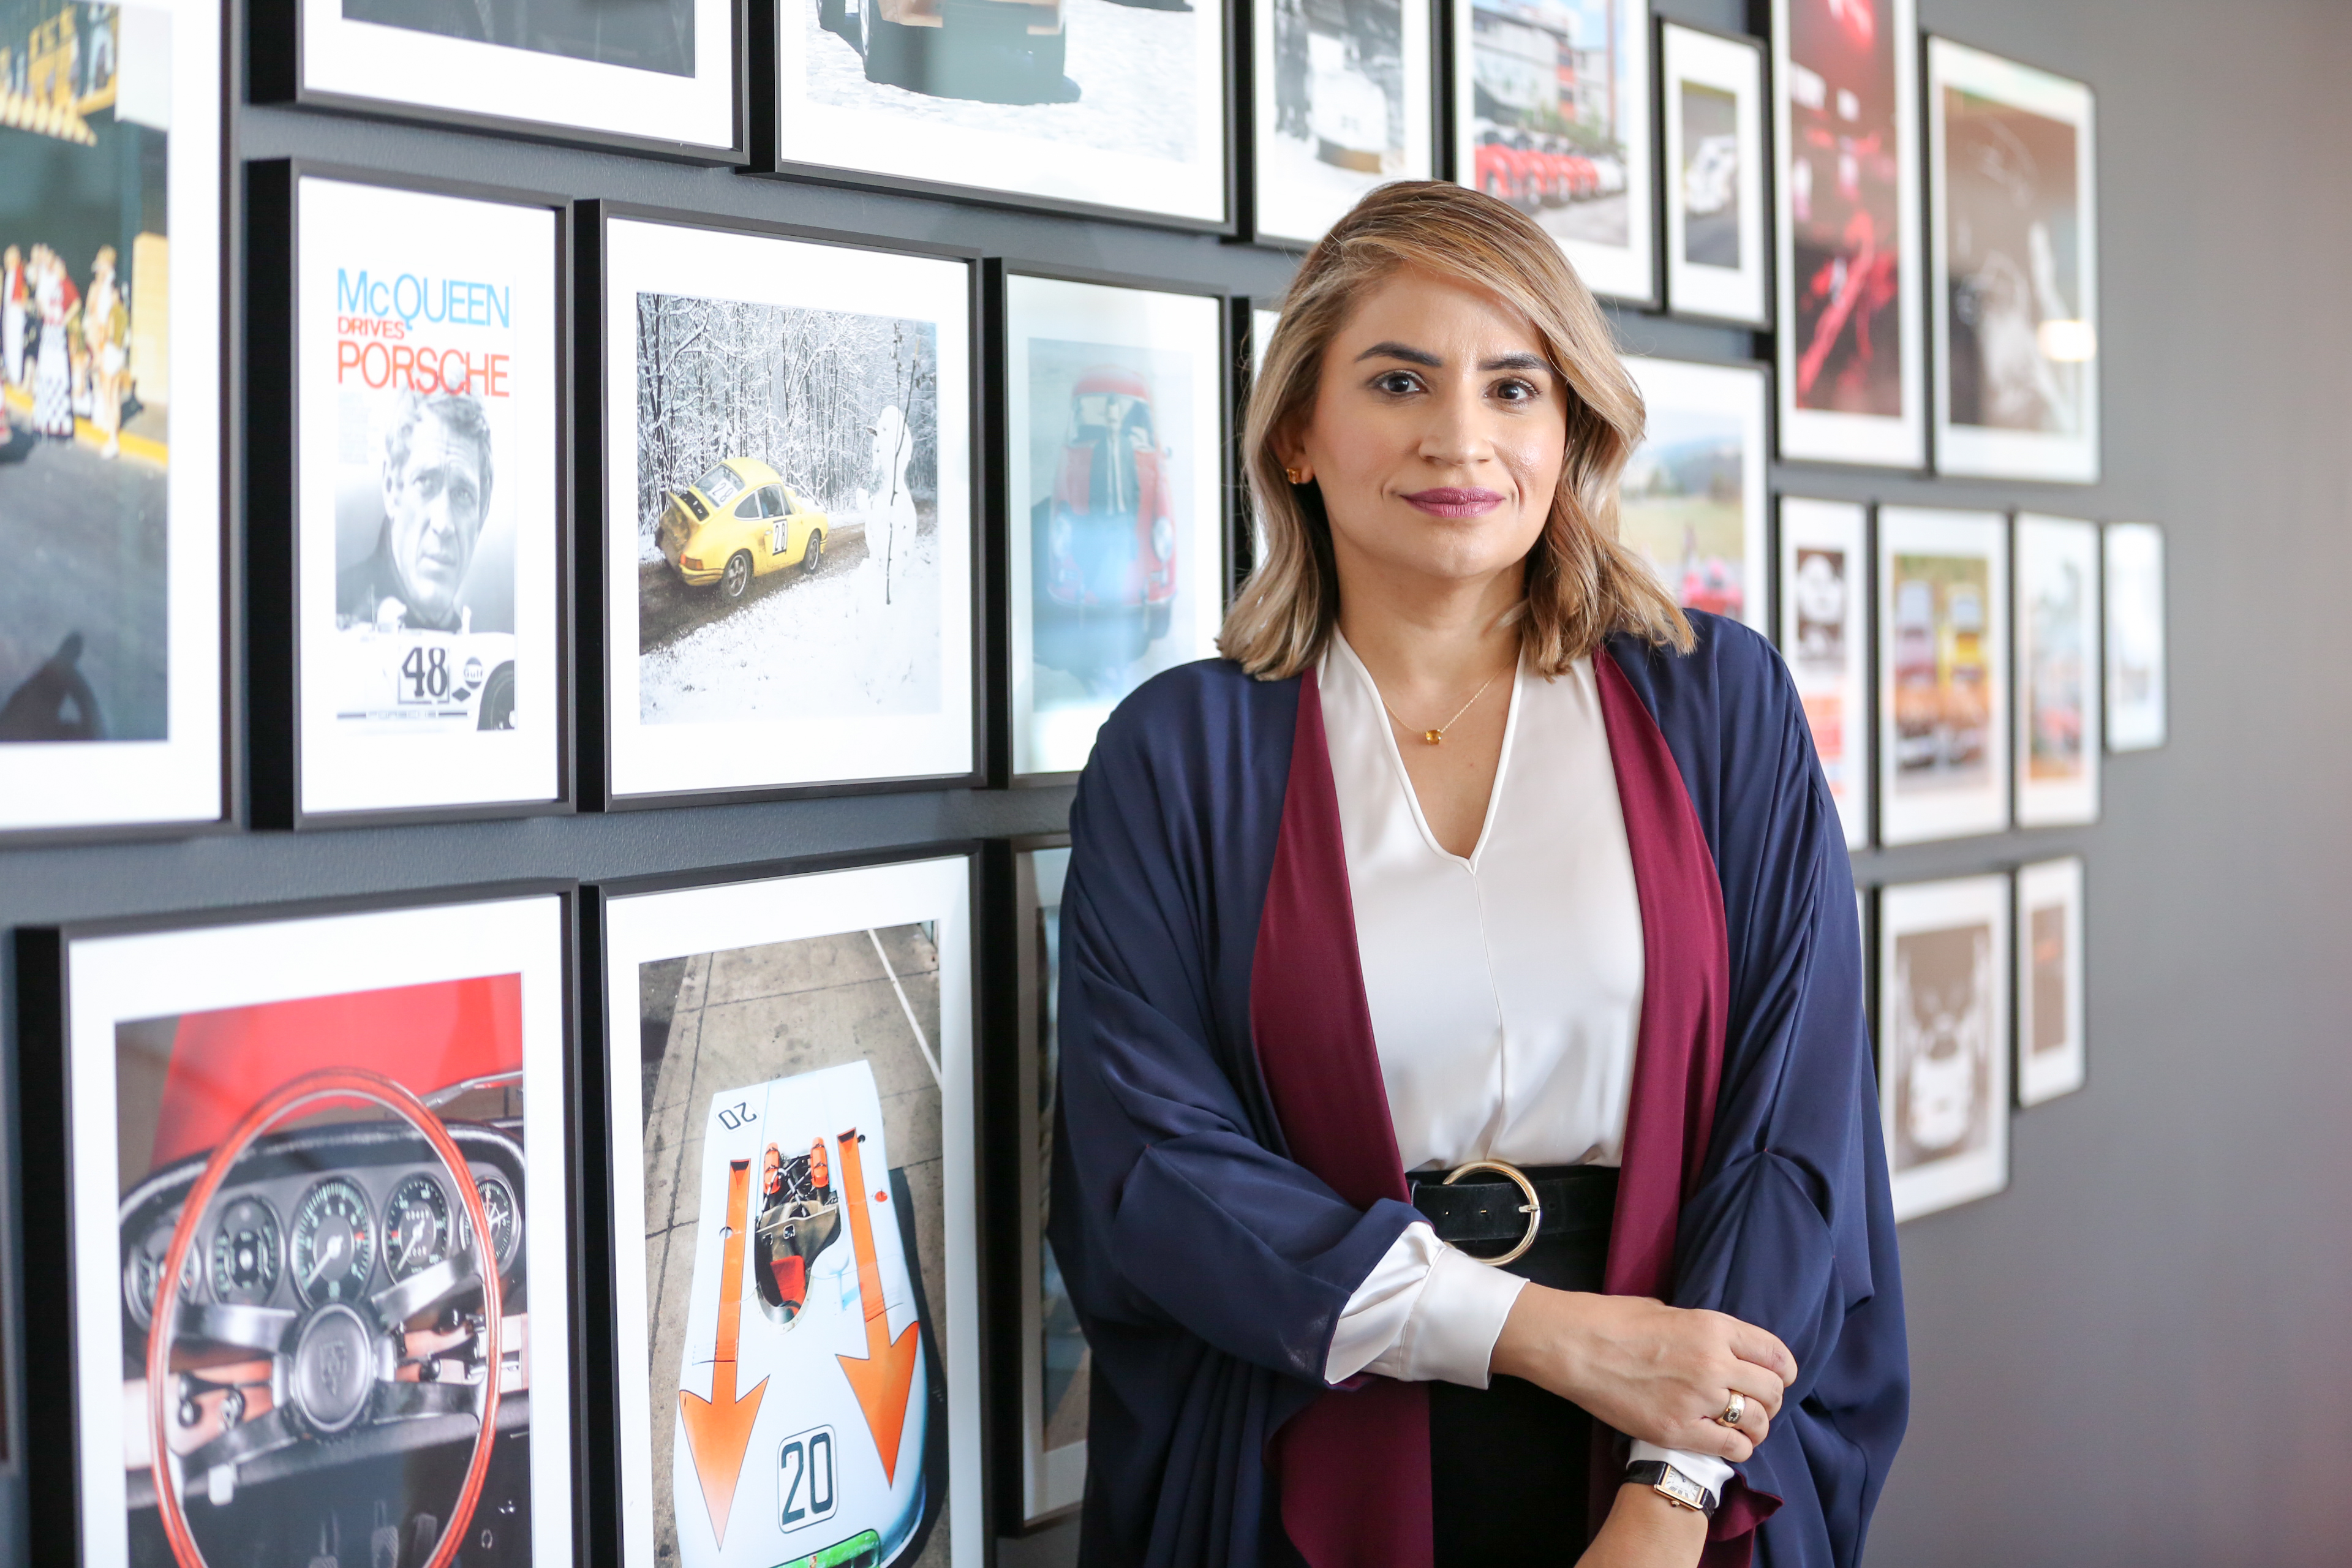 Woman stands in front of wall of automotive-related framed pictures